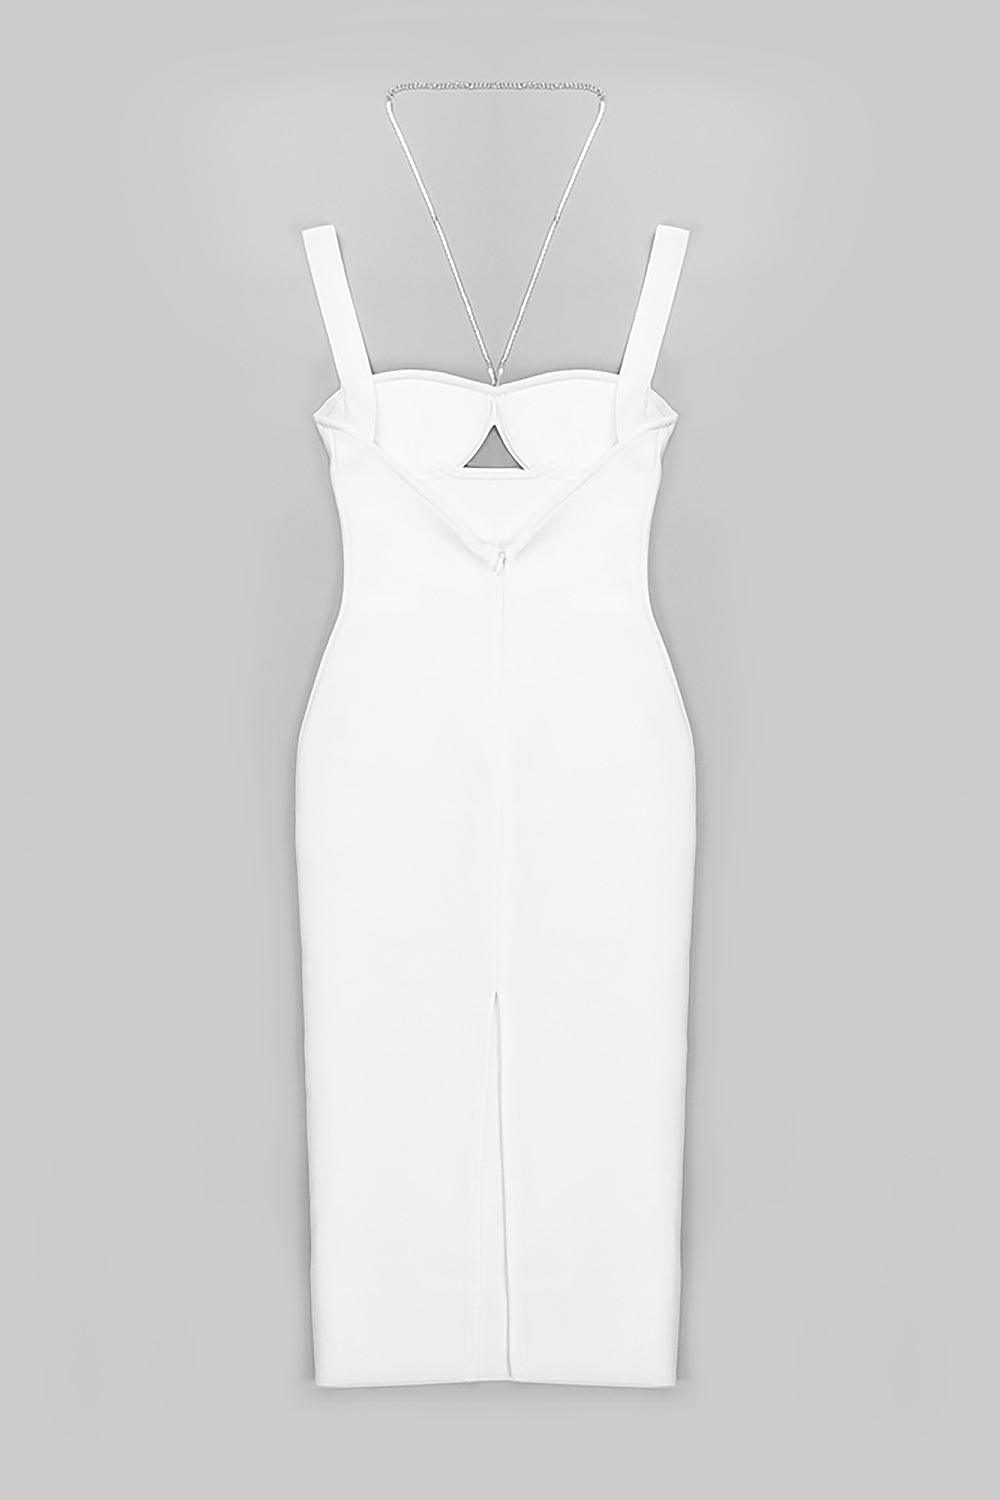 Crystal Chain Halter Backless Bandage Dress In White